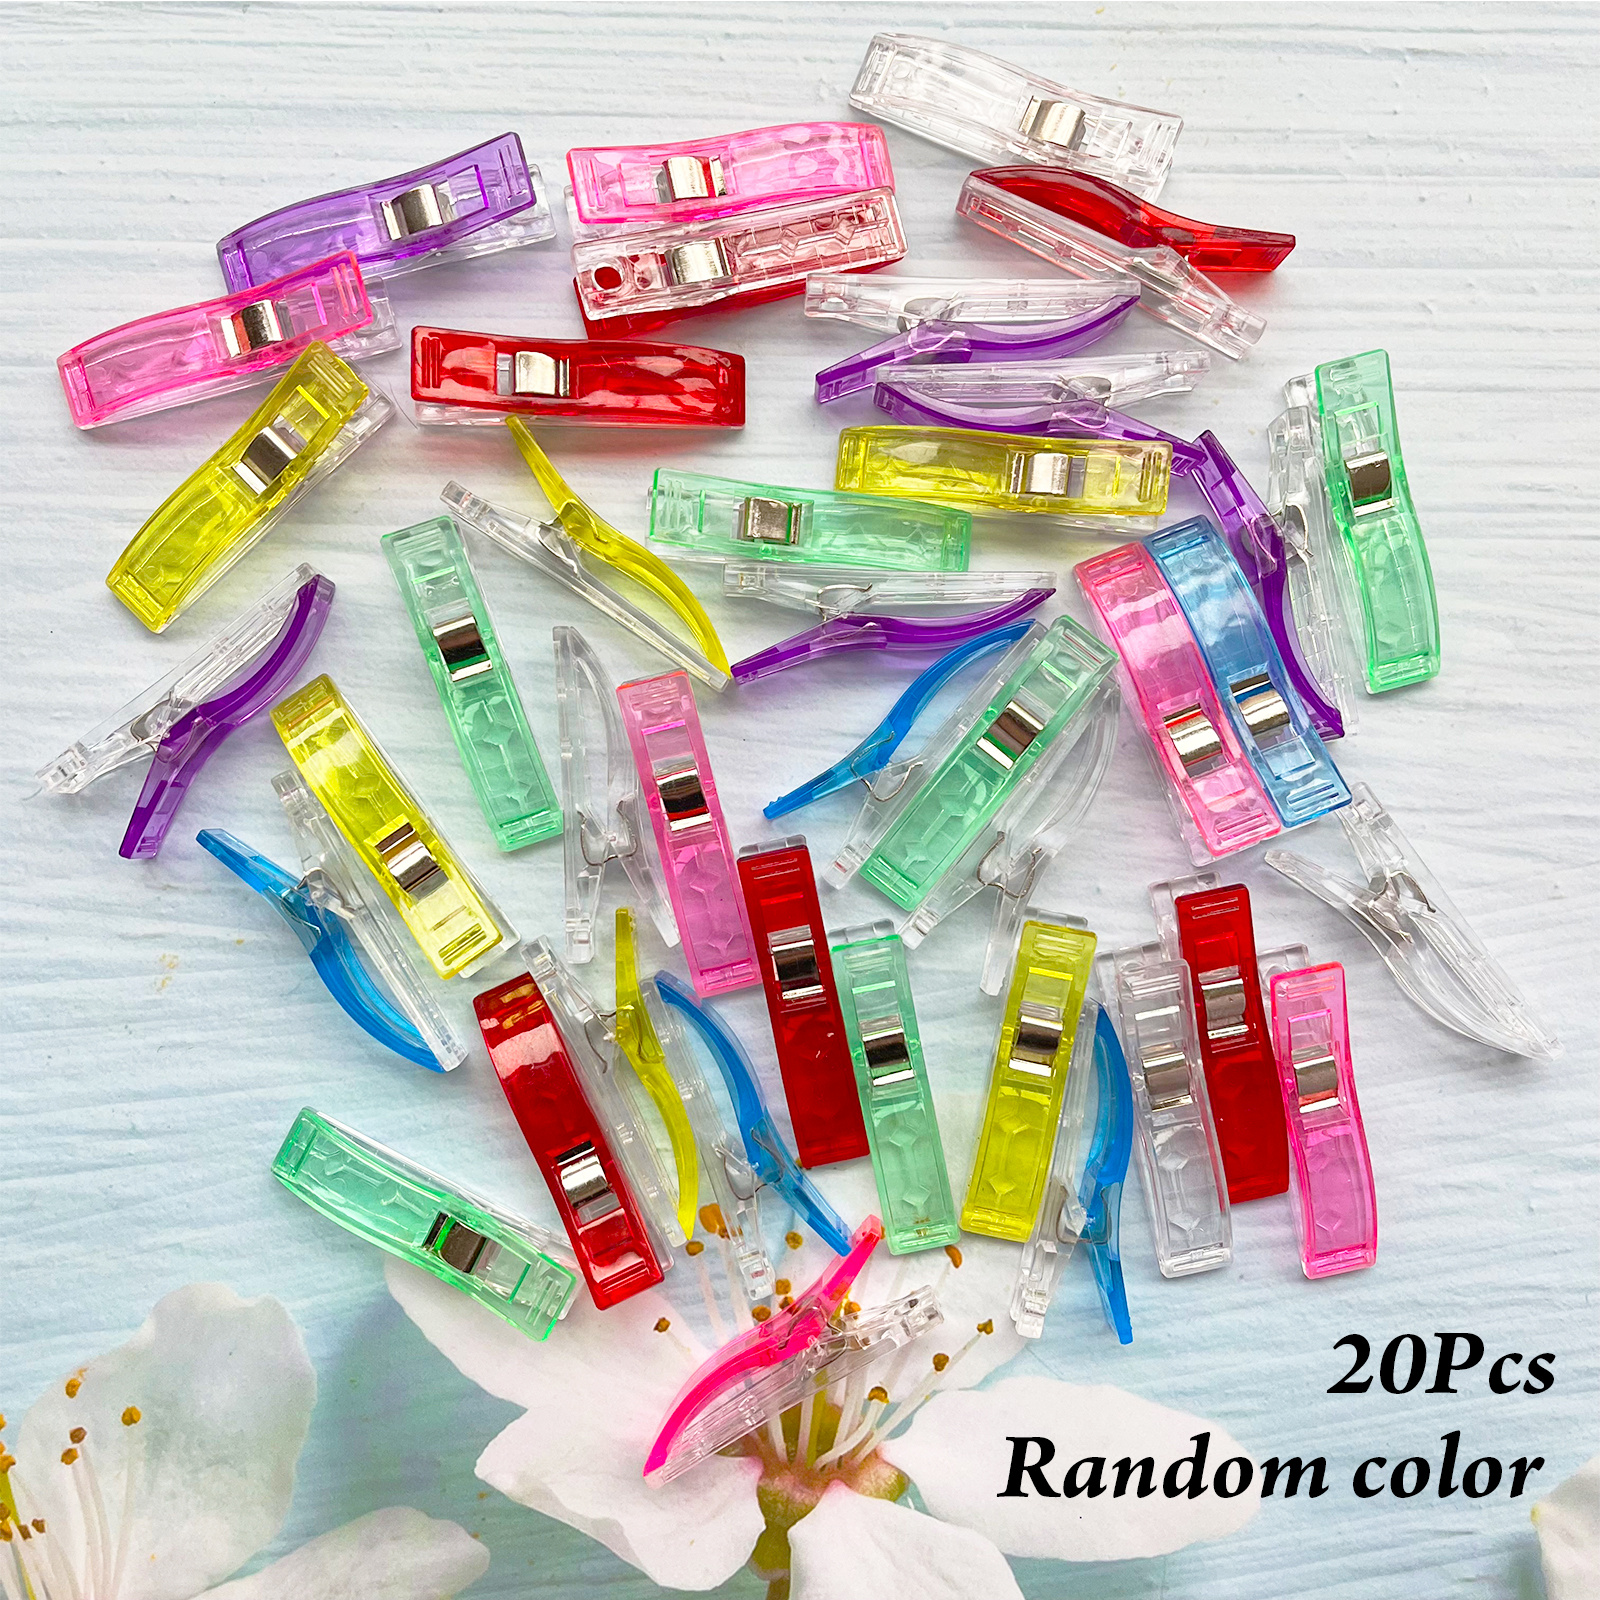 Sewing Clips, Sewing Quilting Crafting, Multi-color Fabric Clips, Craft  Clips, For Sewing Crafting, Diy(20pcs, Random Color) -z